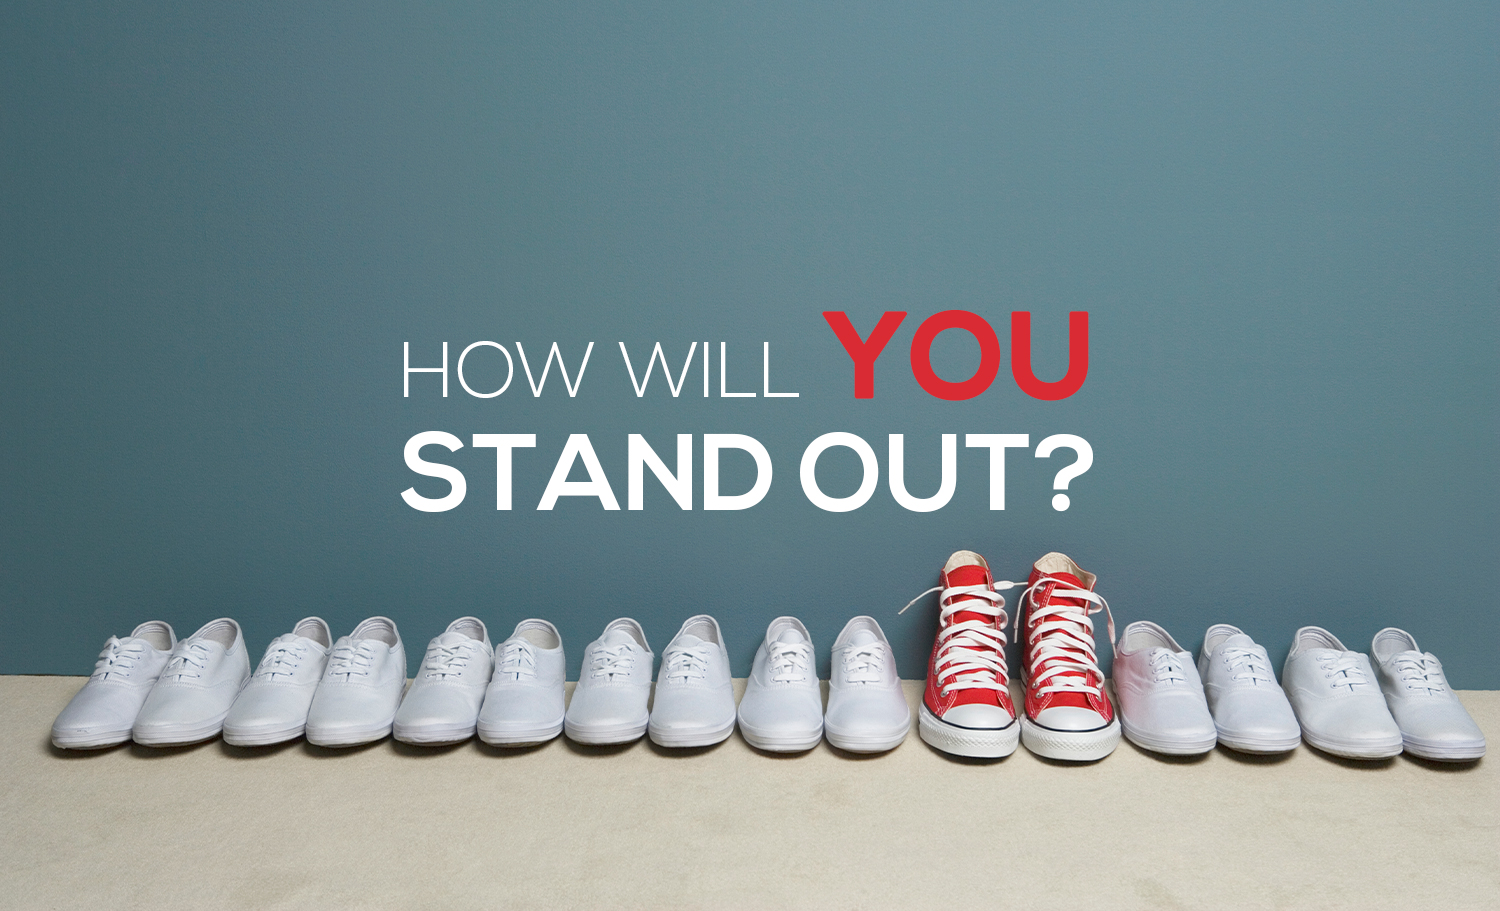 How will you stand out?